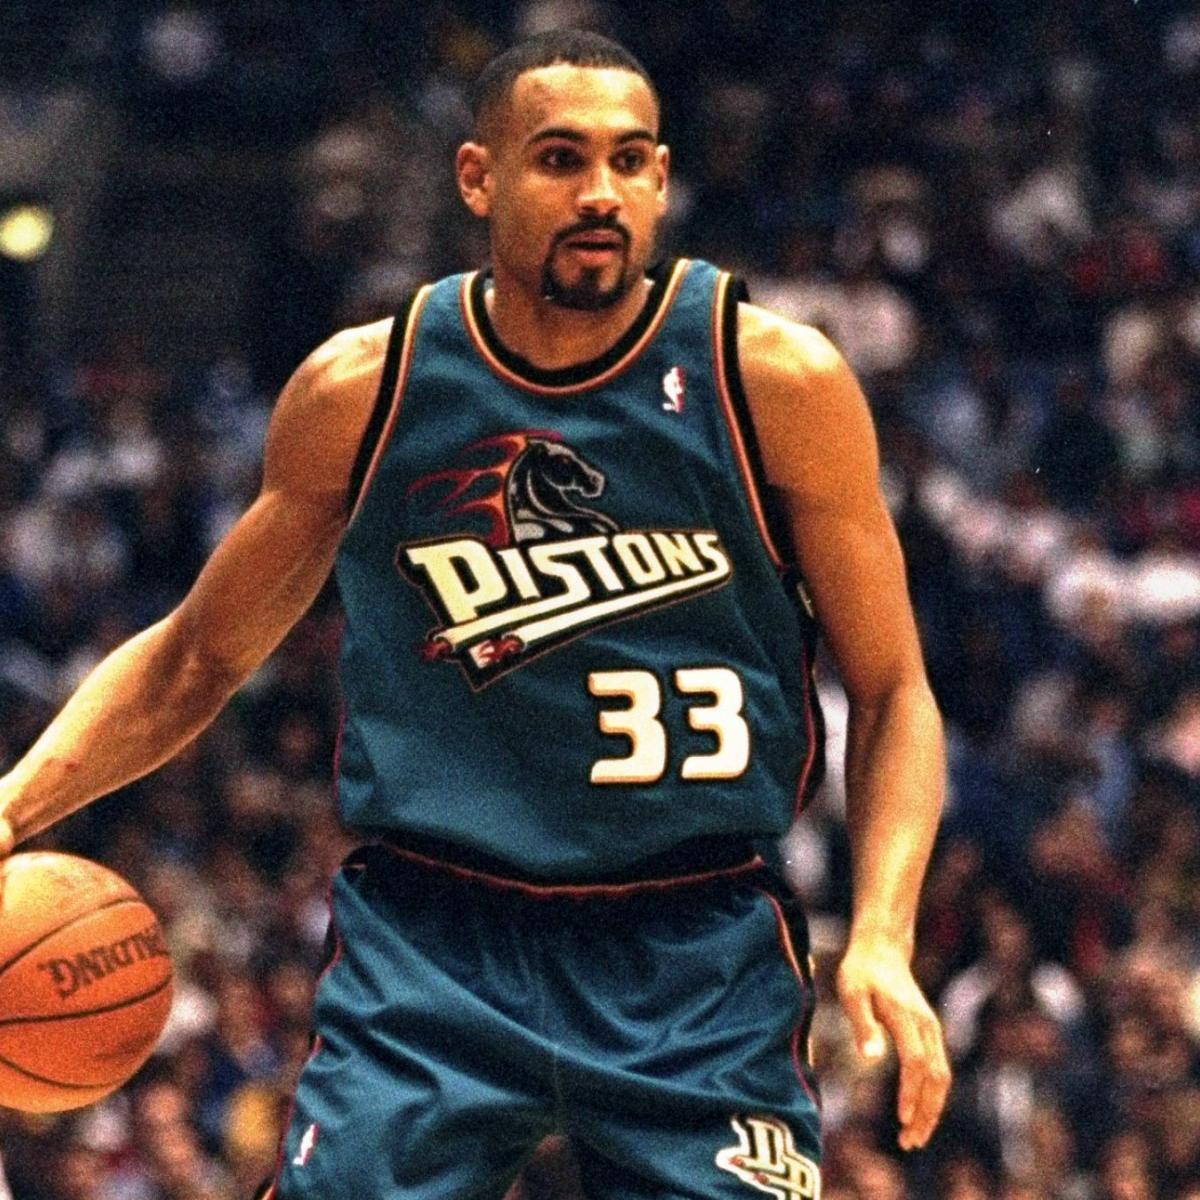 Grant Hill thinks a misdiagnosis destroyed his ankle and career